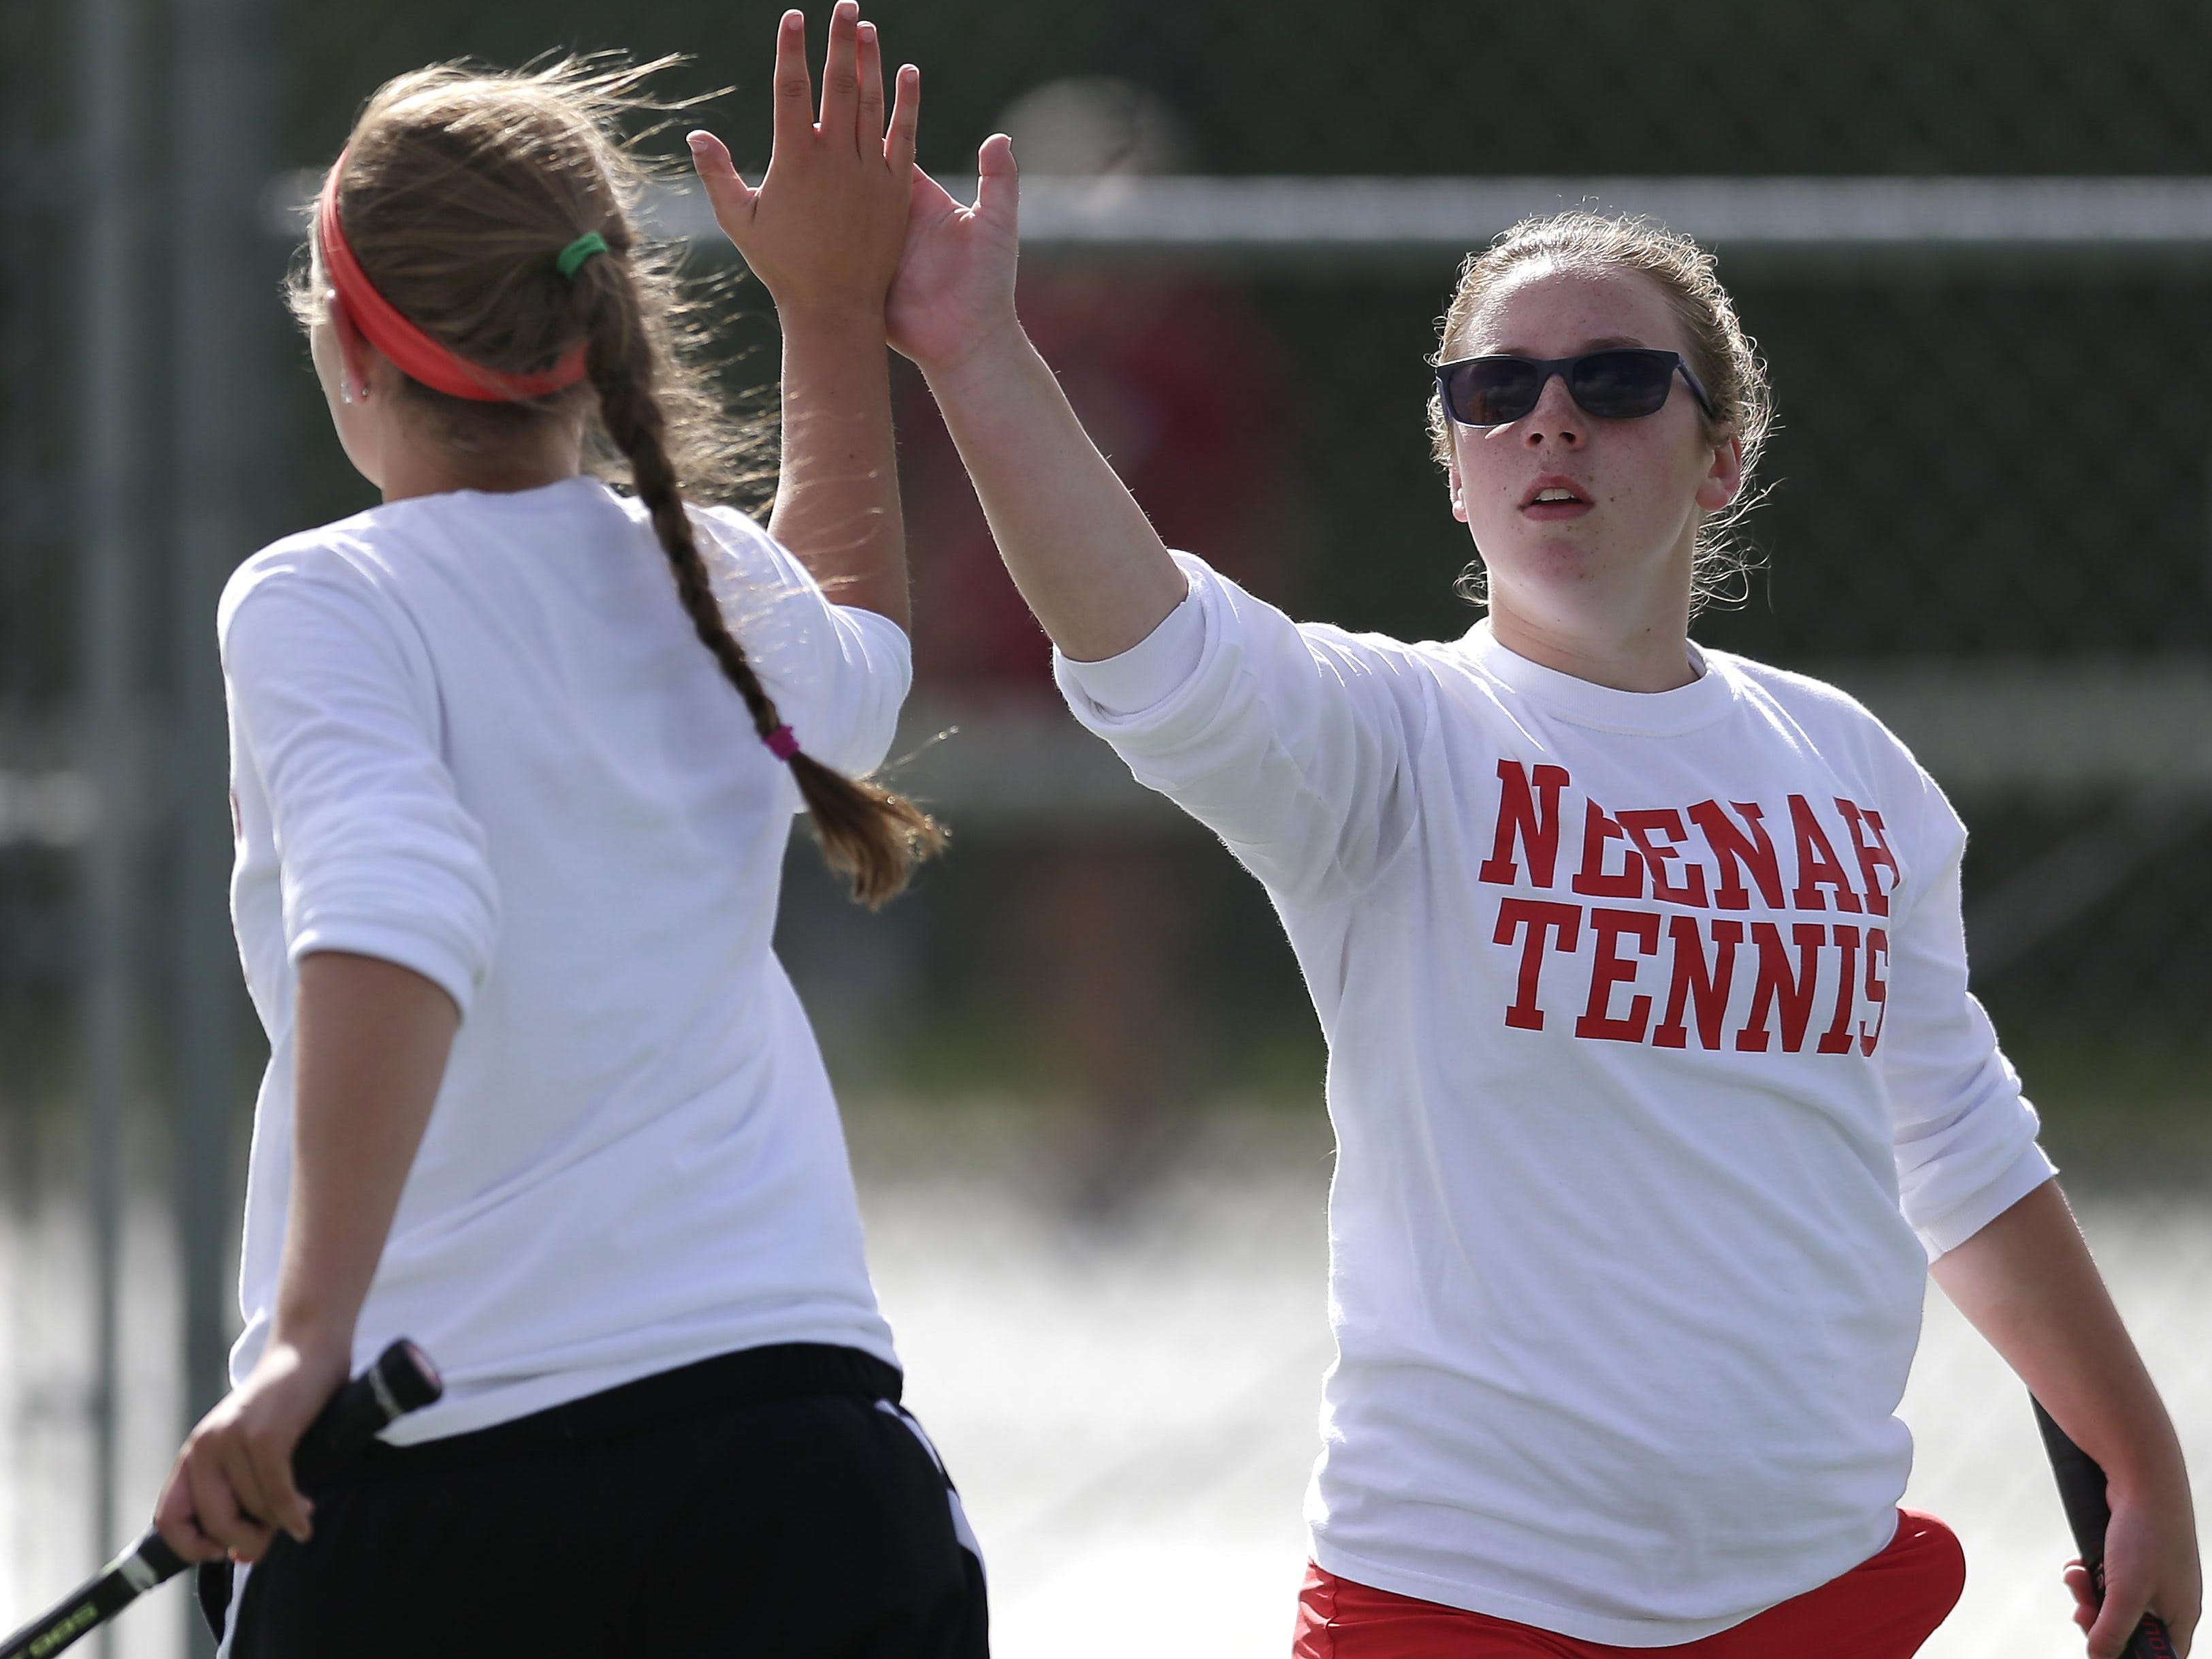 Neenah’s Kendra Kappes and Christina Price will compete at No. 1 doubles at the WIAA state team tournament this weekend.